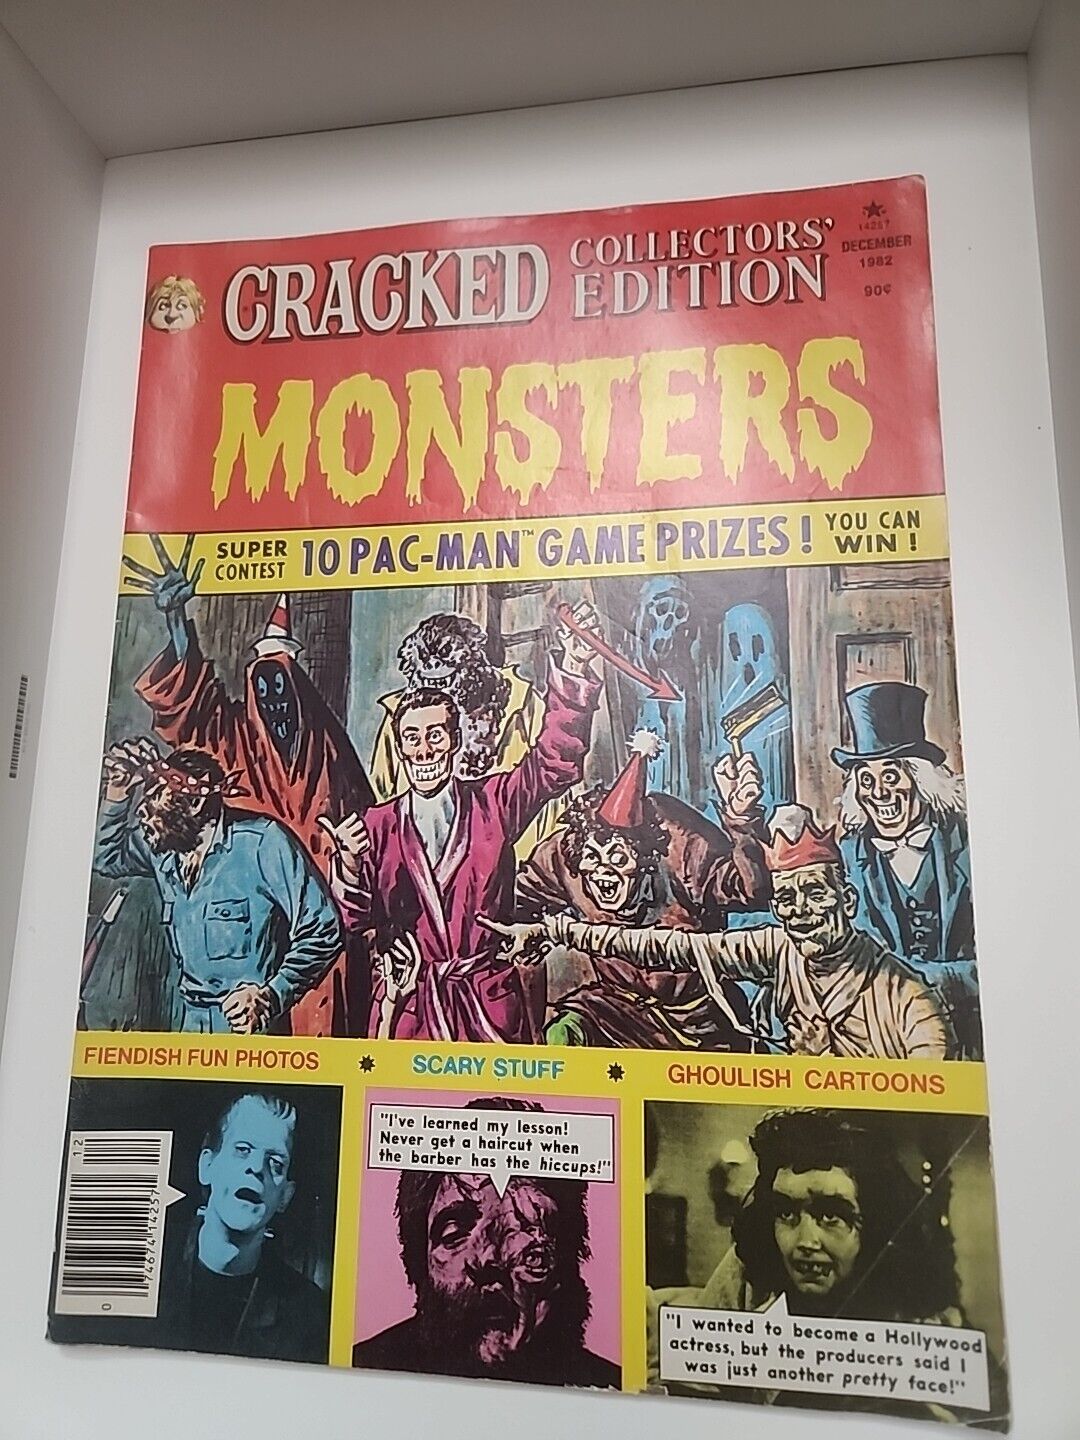 Cracked Magazine #14257 December 1982 Collectors Edition